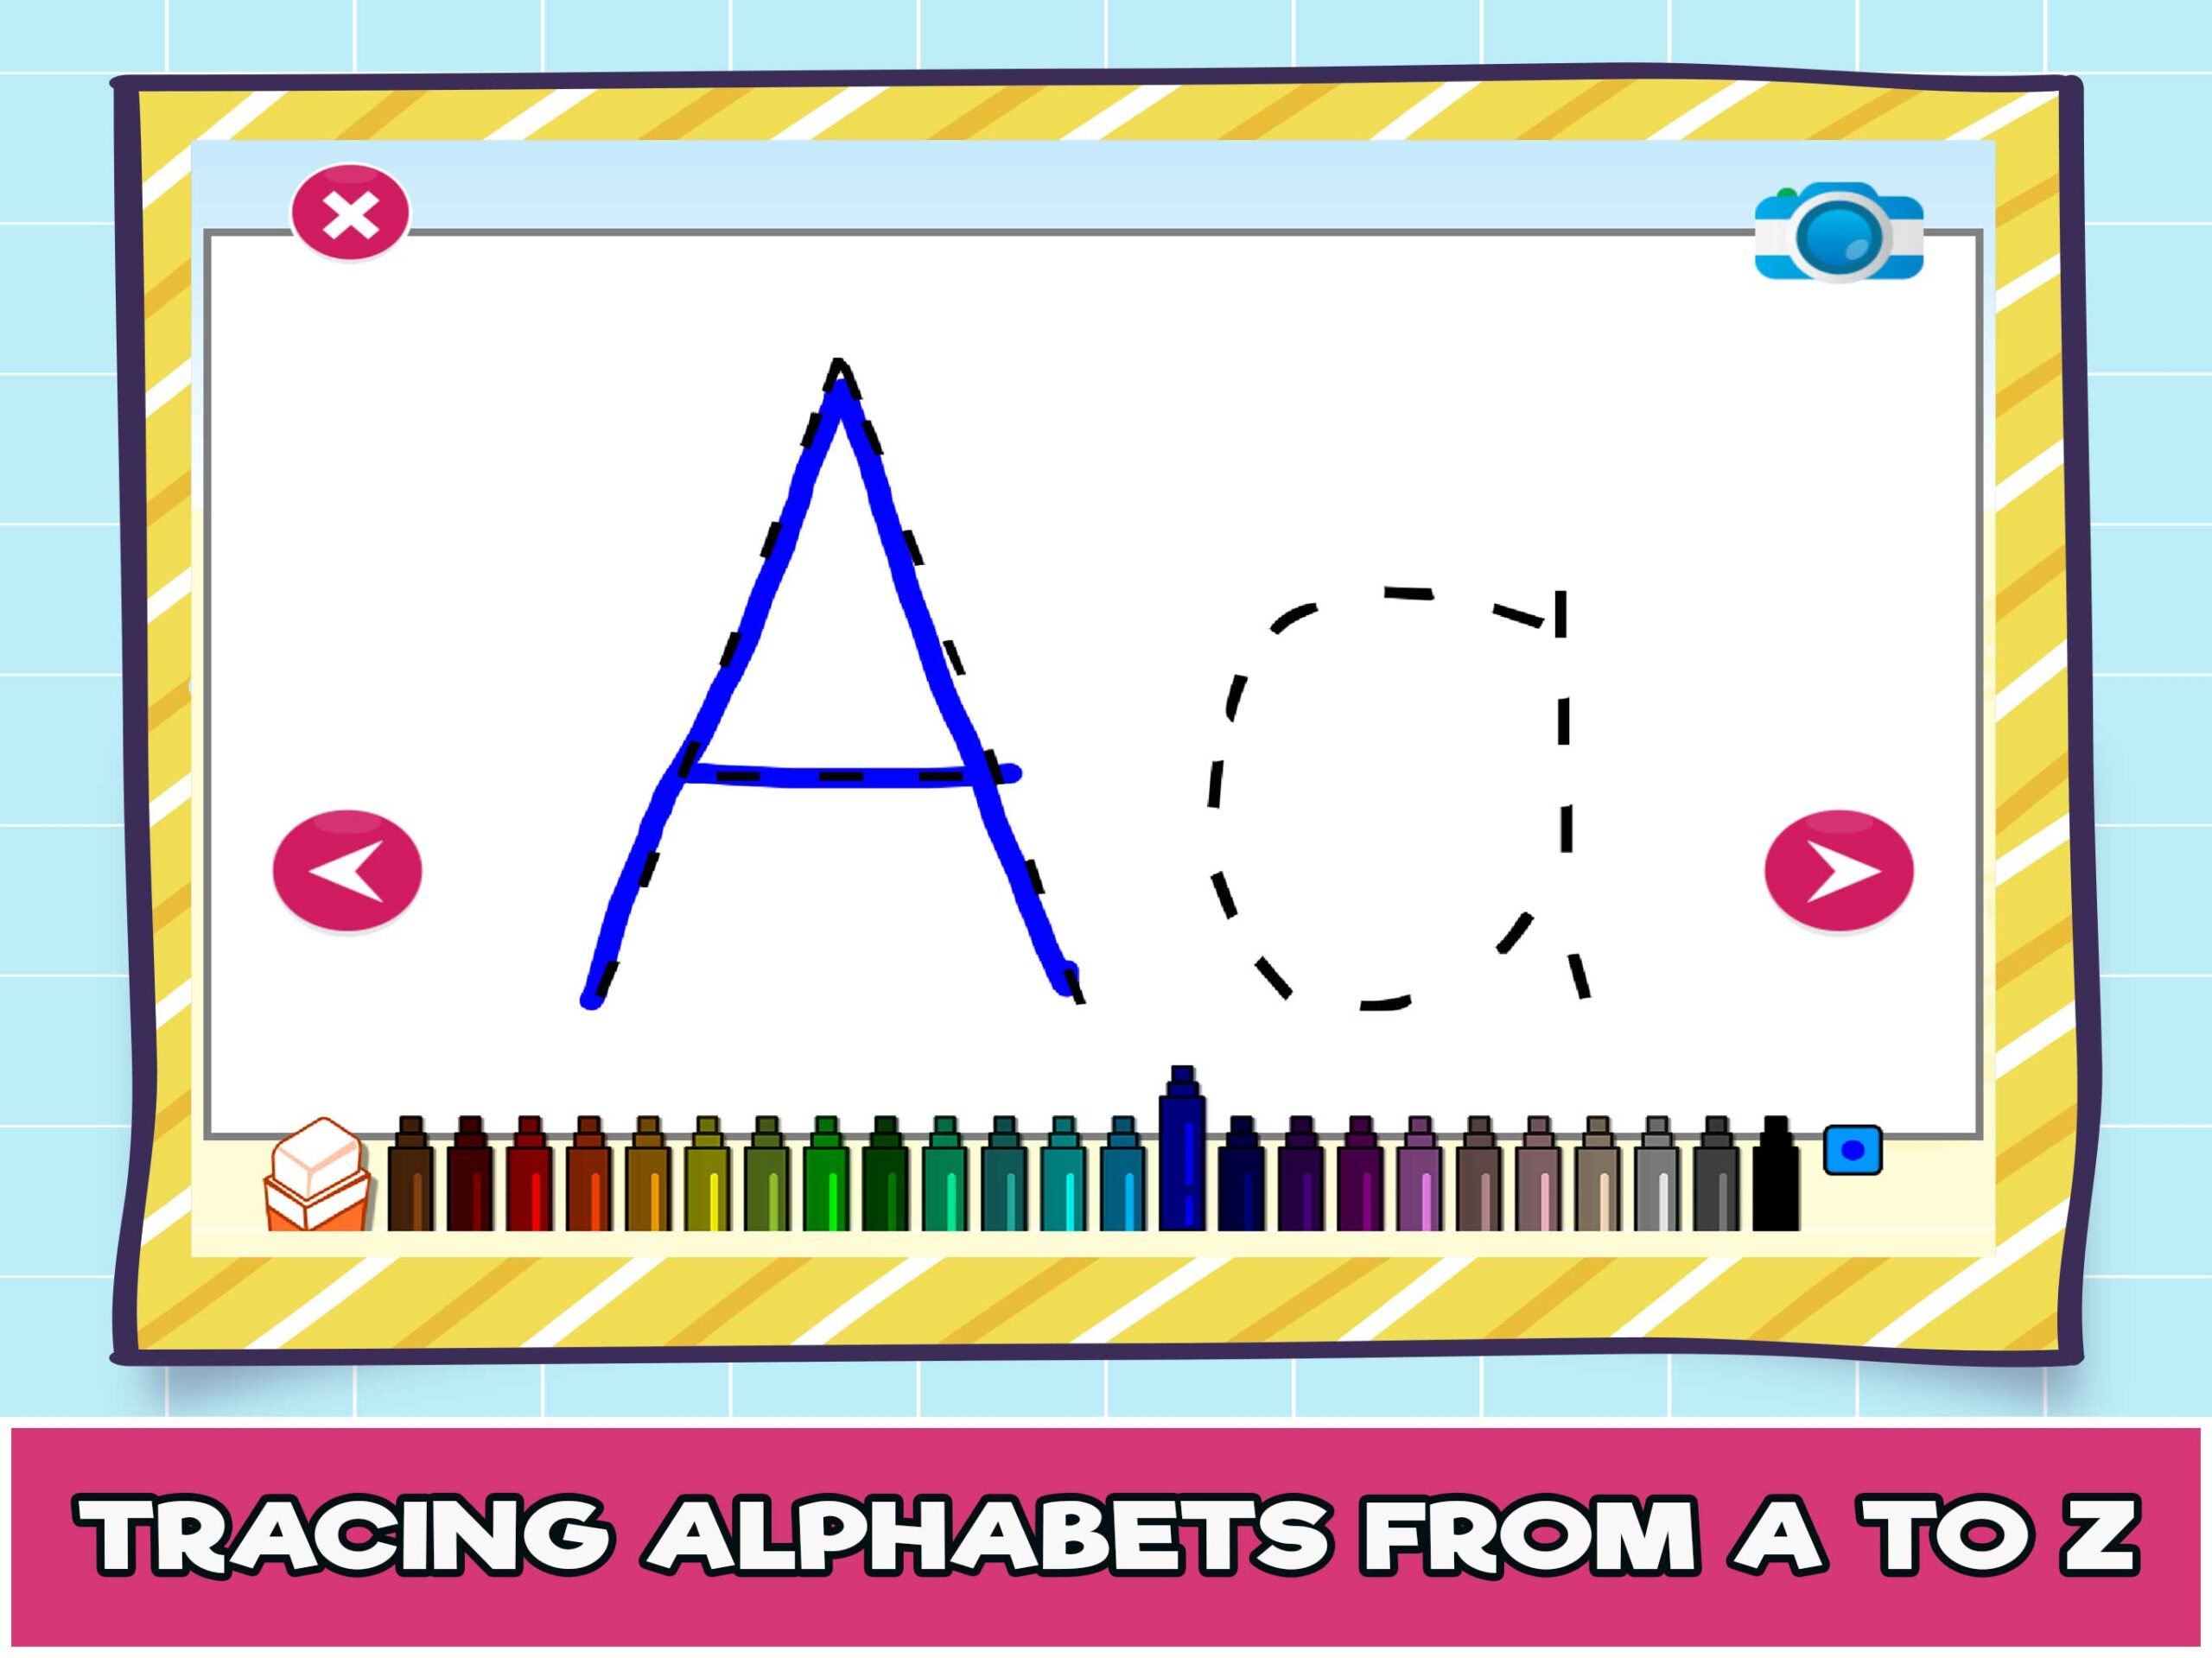 Free Online Alphabet Tracing Game For Kids - The Learning Apps regarding Alphabet Tracing Game